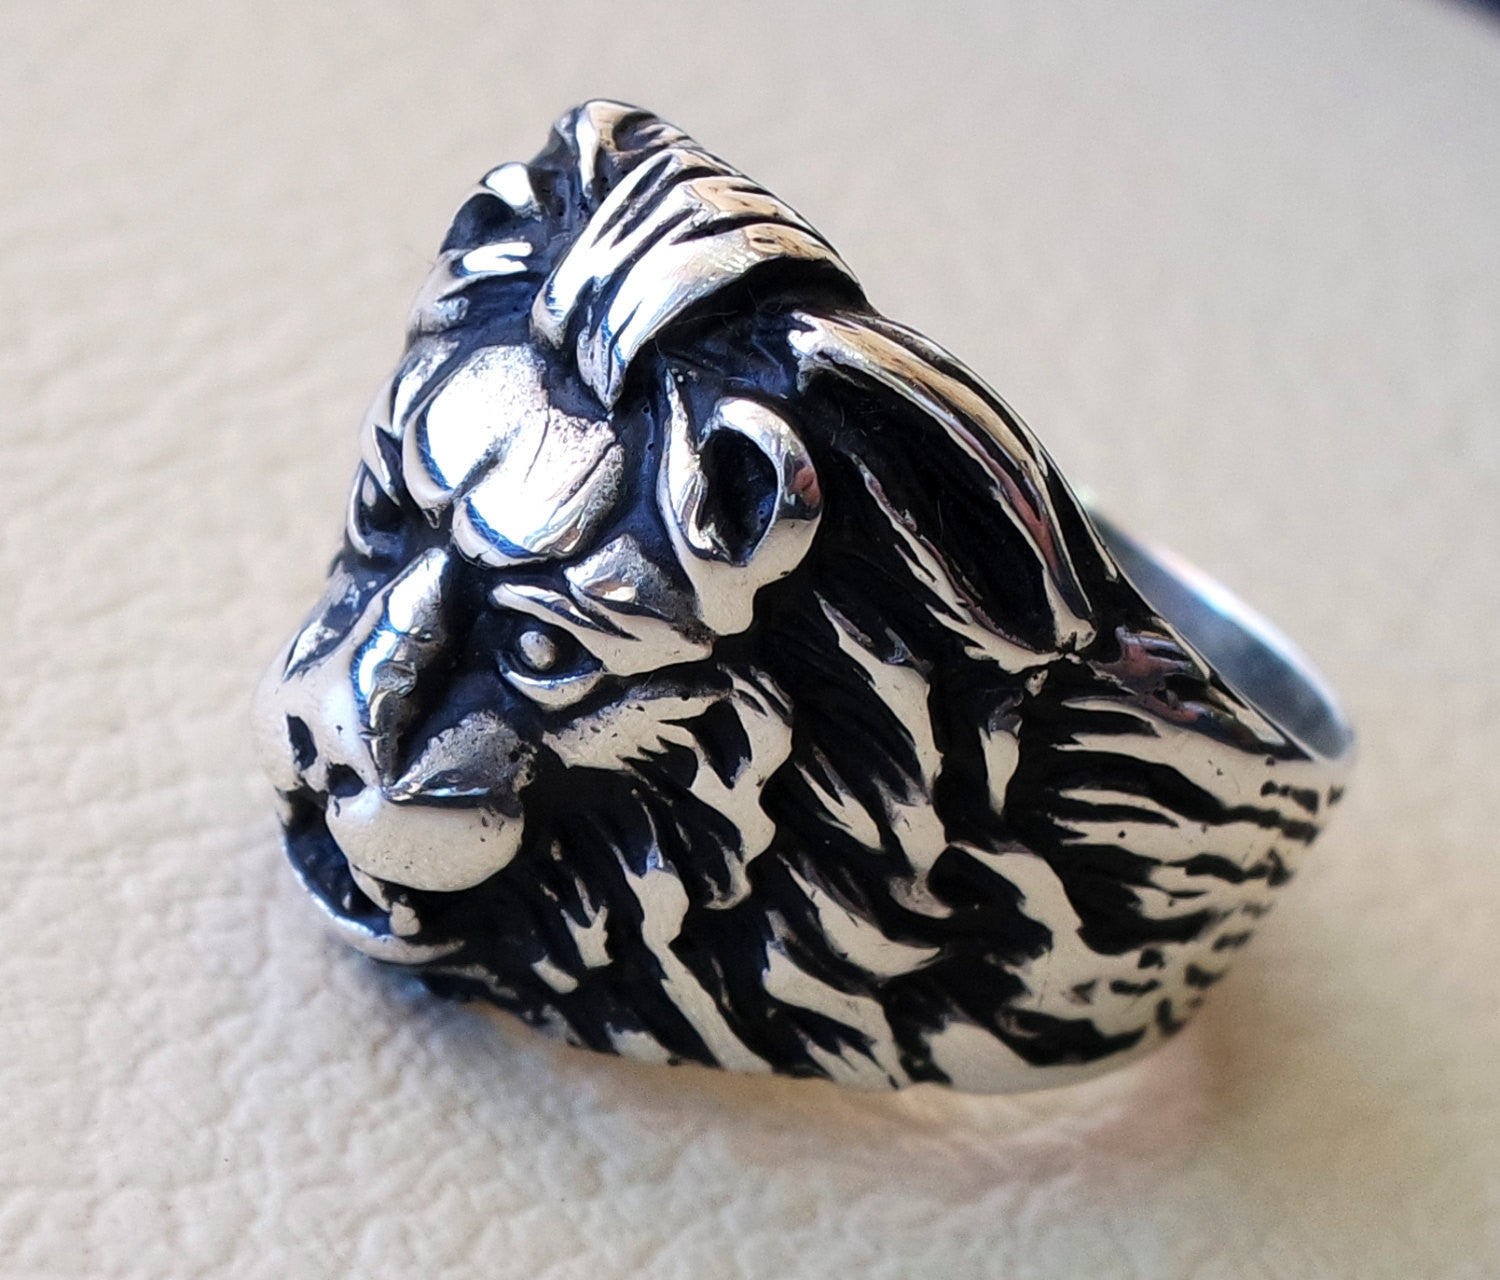 lion ring heavy sterling silver 925 man biker ring all sizes handmade animal head jewelry fast shipping detailed craftsmanship